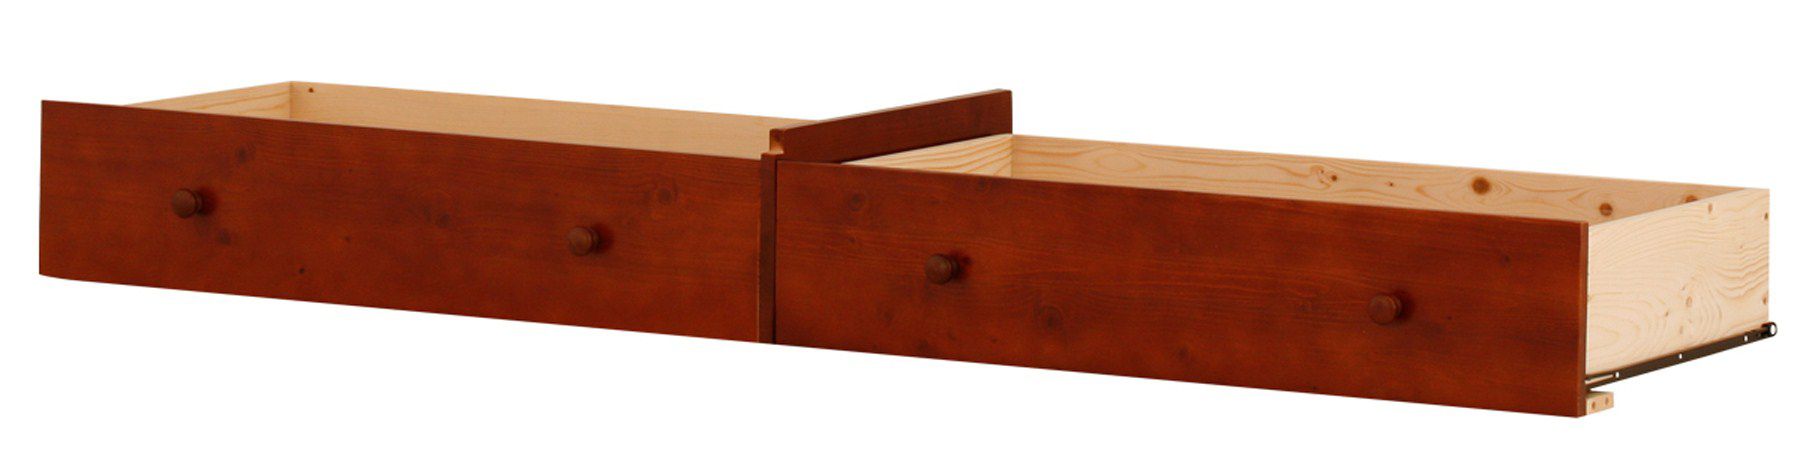 Canwood Extra 2 Drawer Set (Mates - Twin) - Cherry